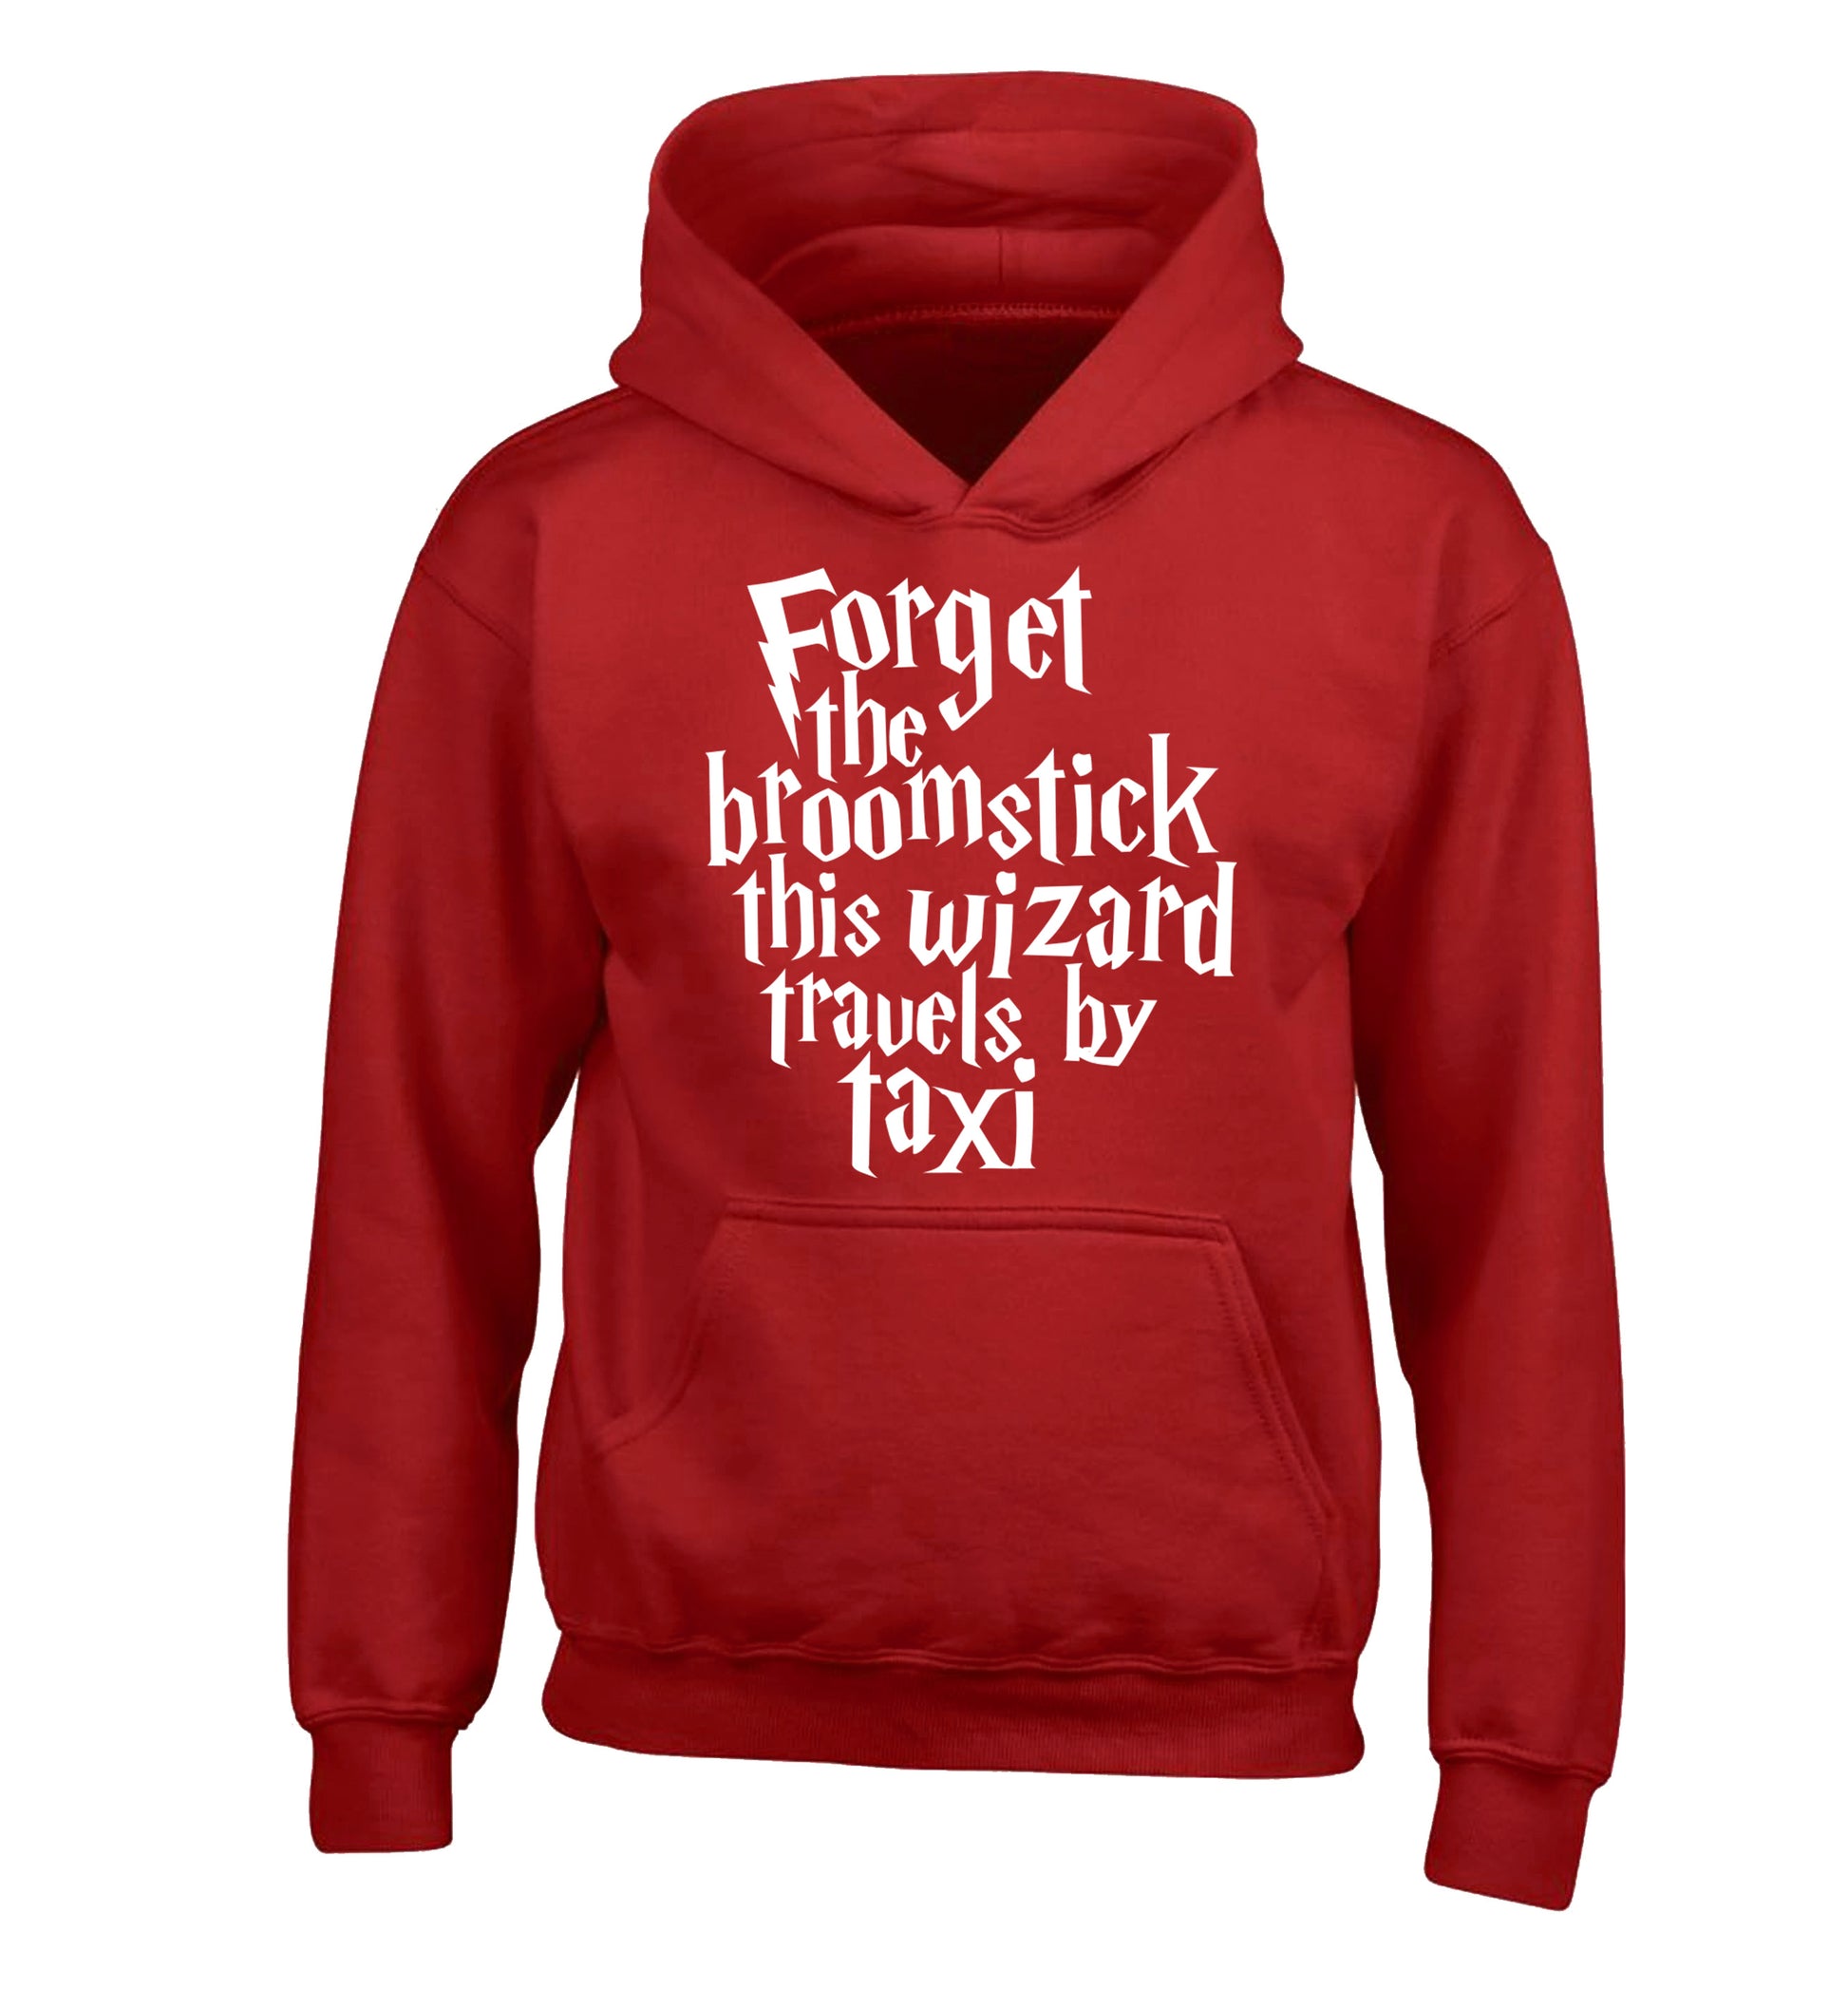 Forget the broomstick this wizard travels by taxi children's red hoodie 12-14 Years